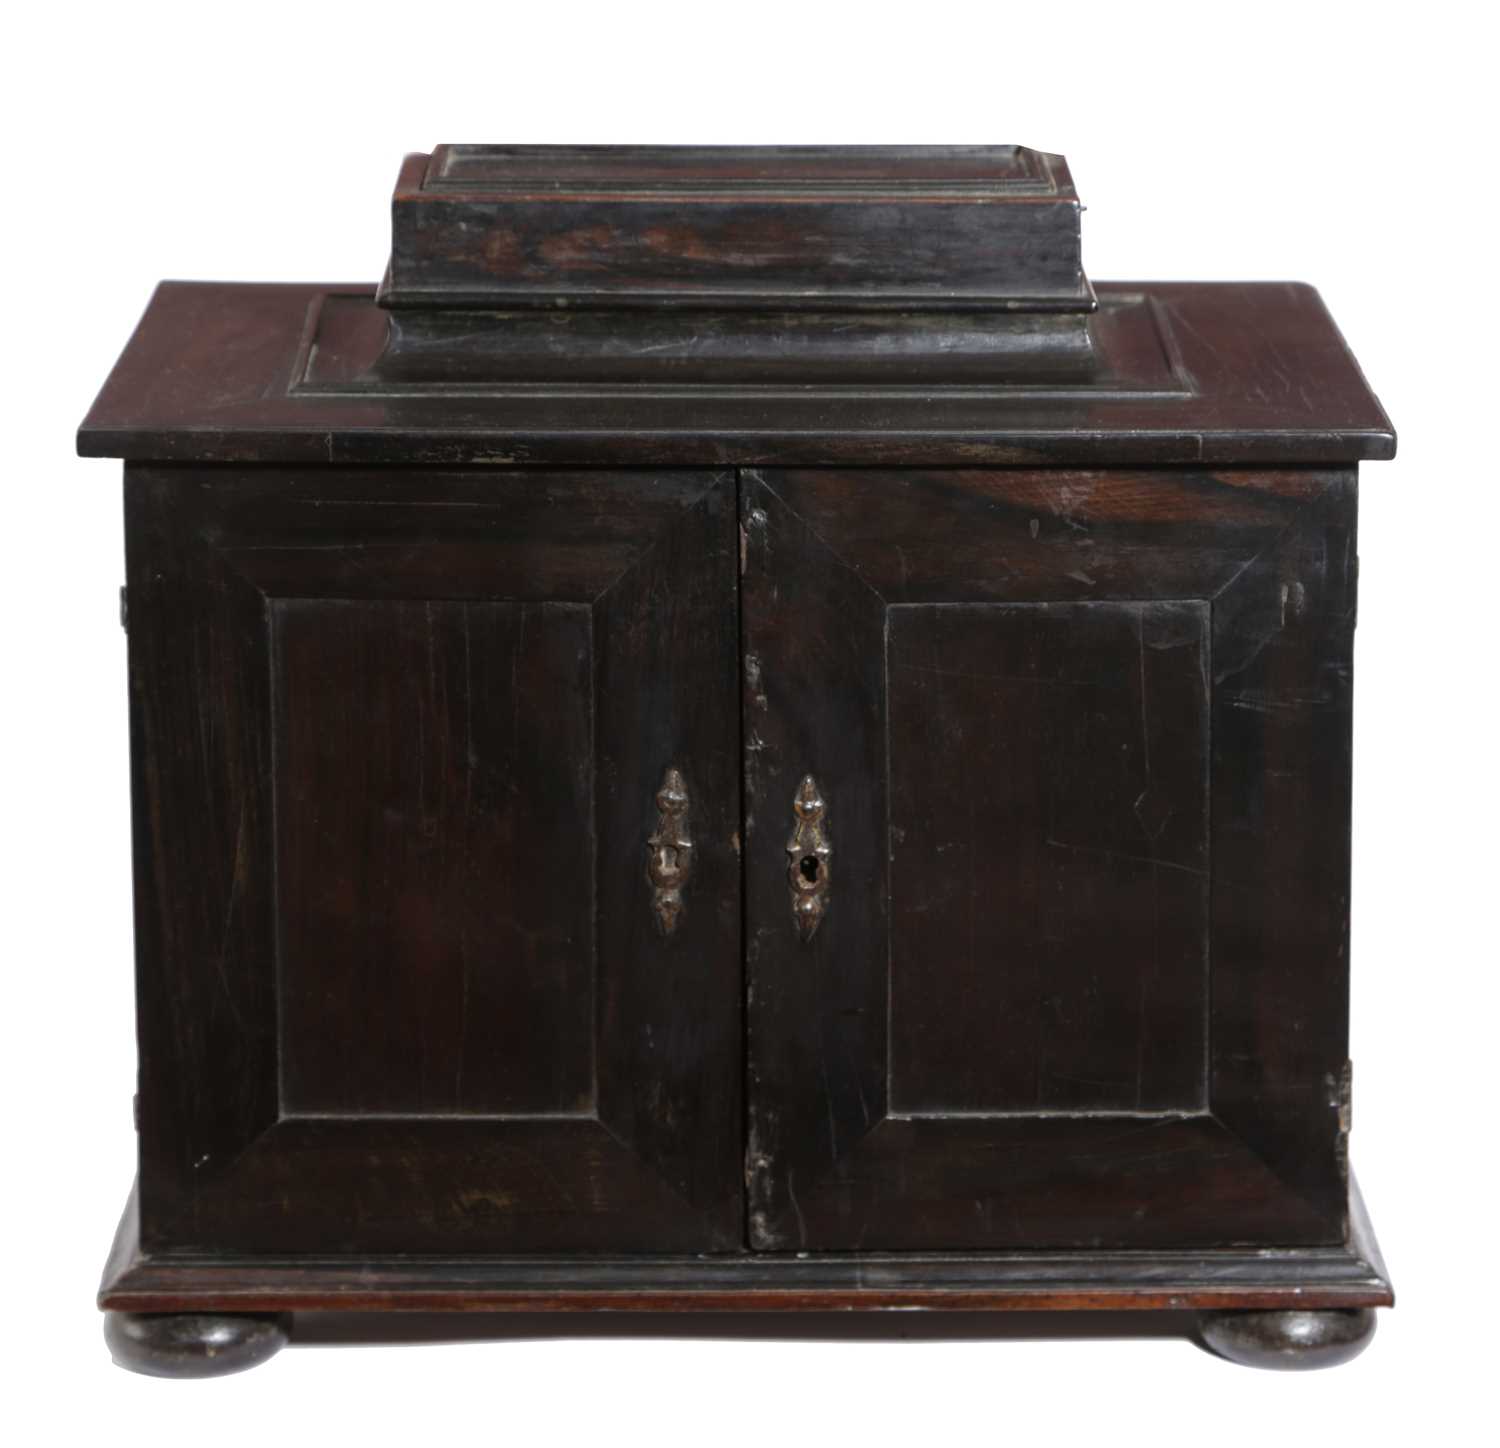 A FLEMISH EBONY TABLE CABINET LATE 17TH / EARLY 18TH CENTURY the raised top with a sliding cover